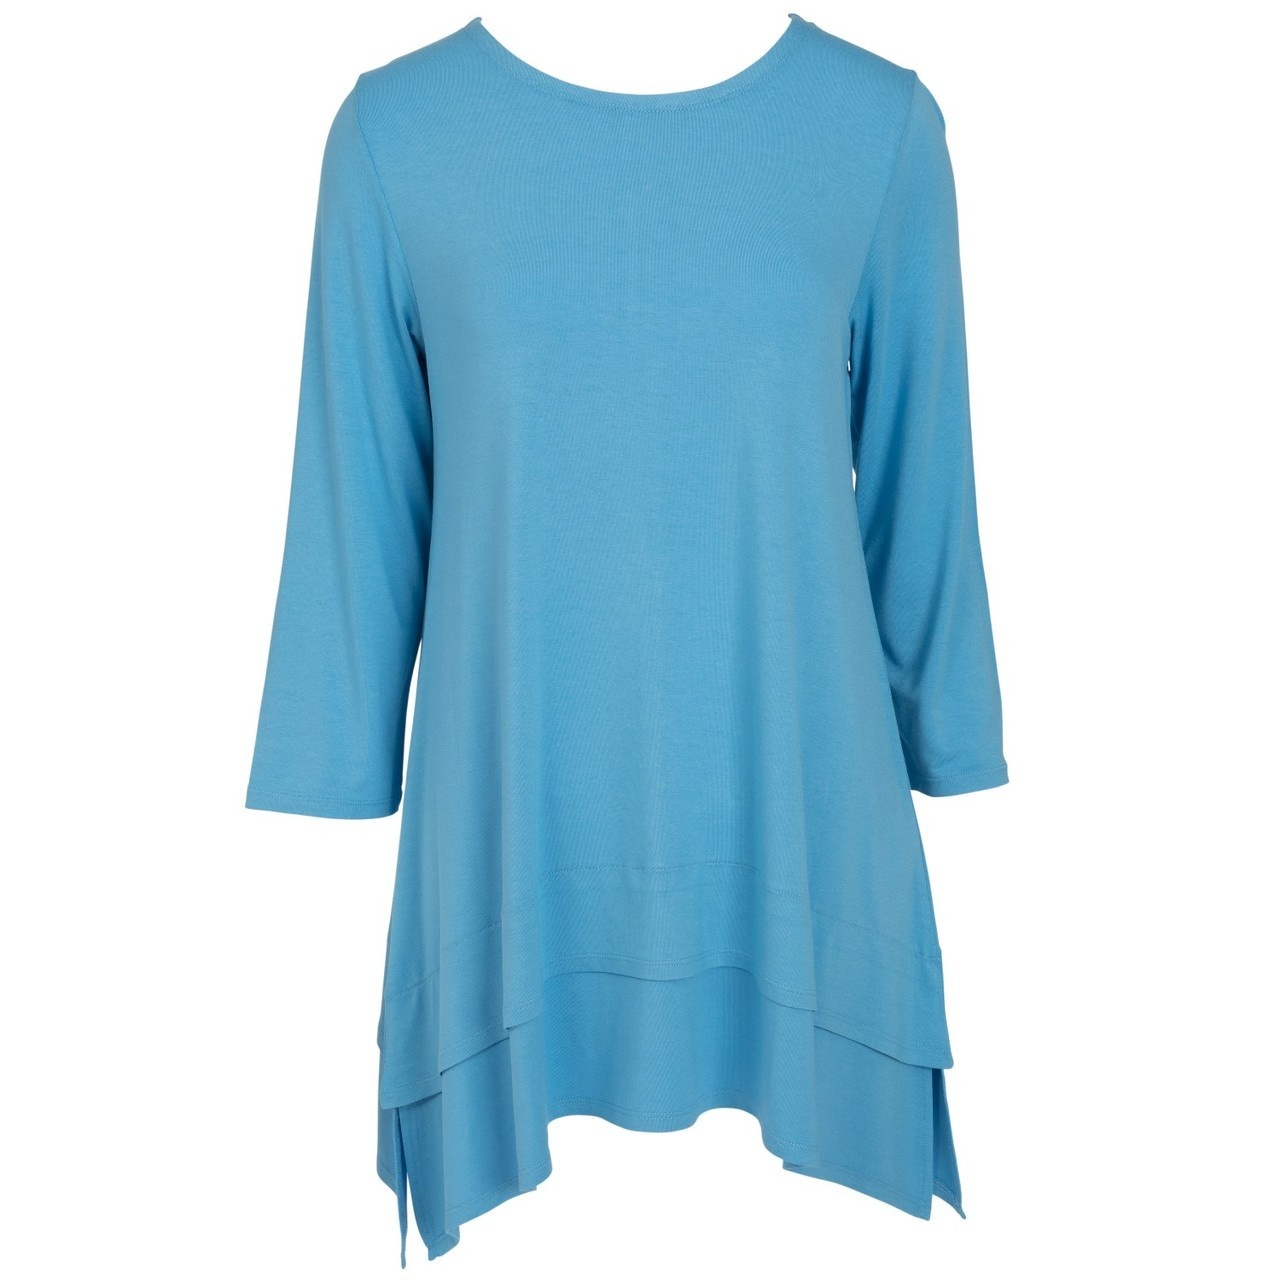 Double Layer Tunic - Azure Blue - SM/MED - MyxnScents